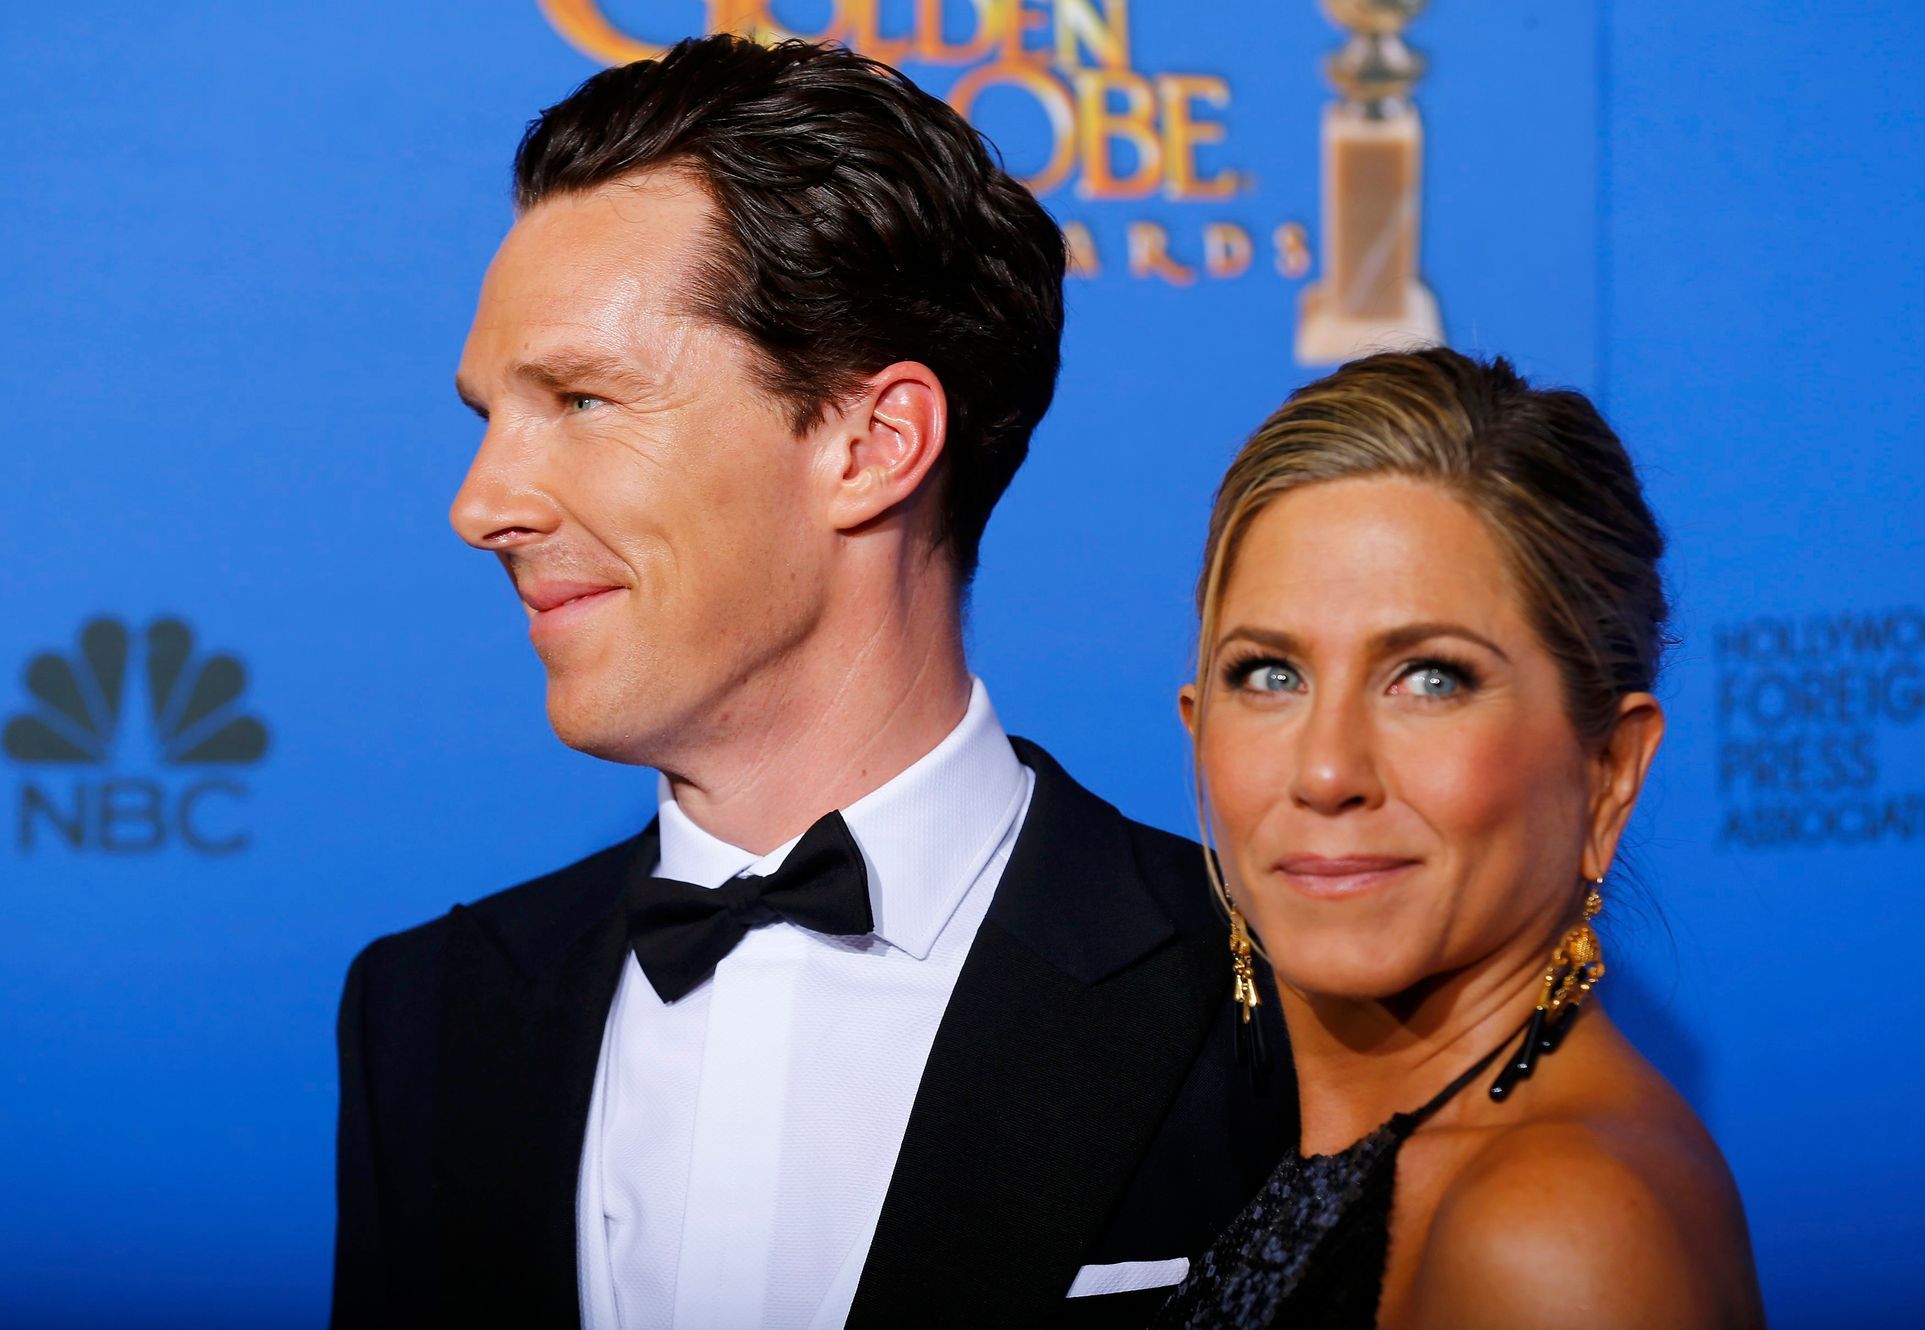 Benedict Cumberbatch and Jennifer Aniston pose backstage during the 72nd Golden Globe Awards in Beverly Hills